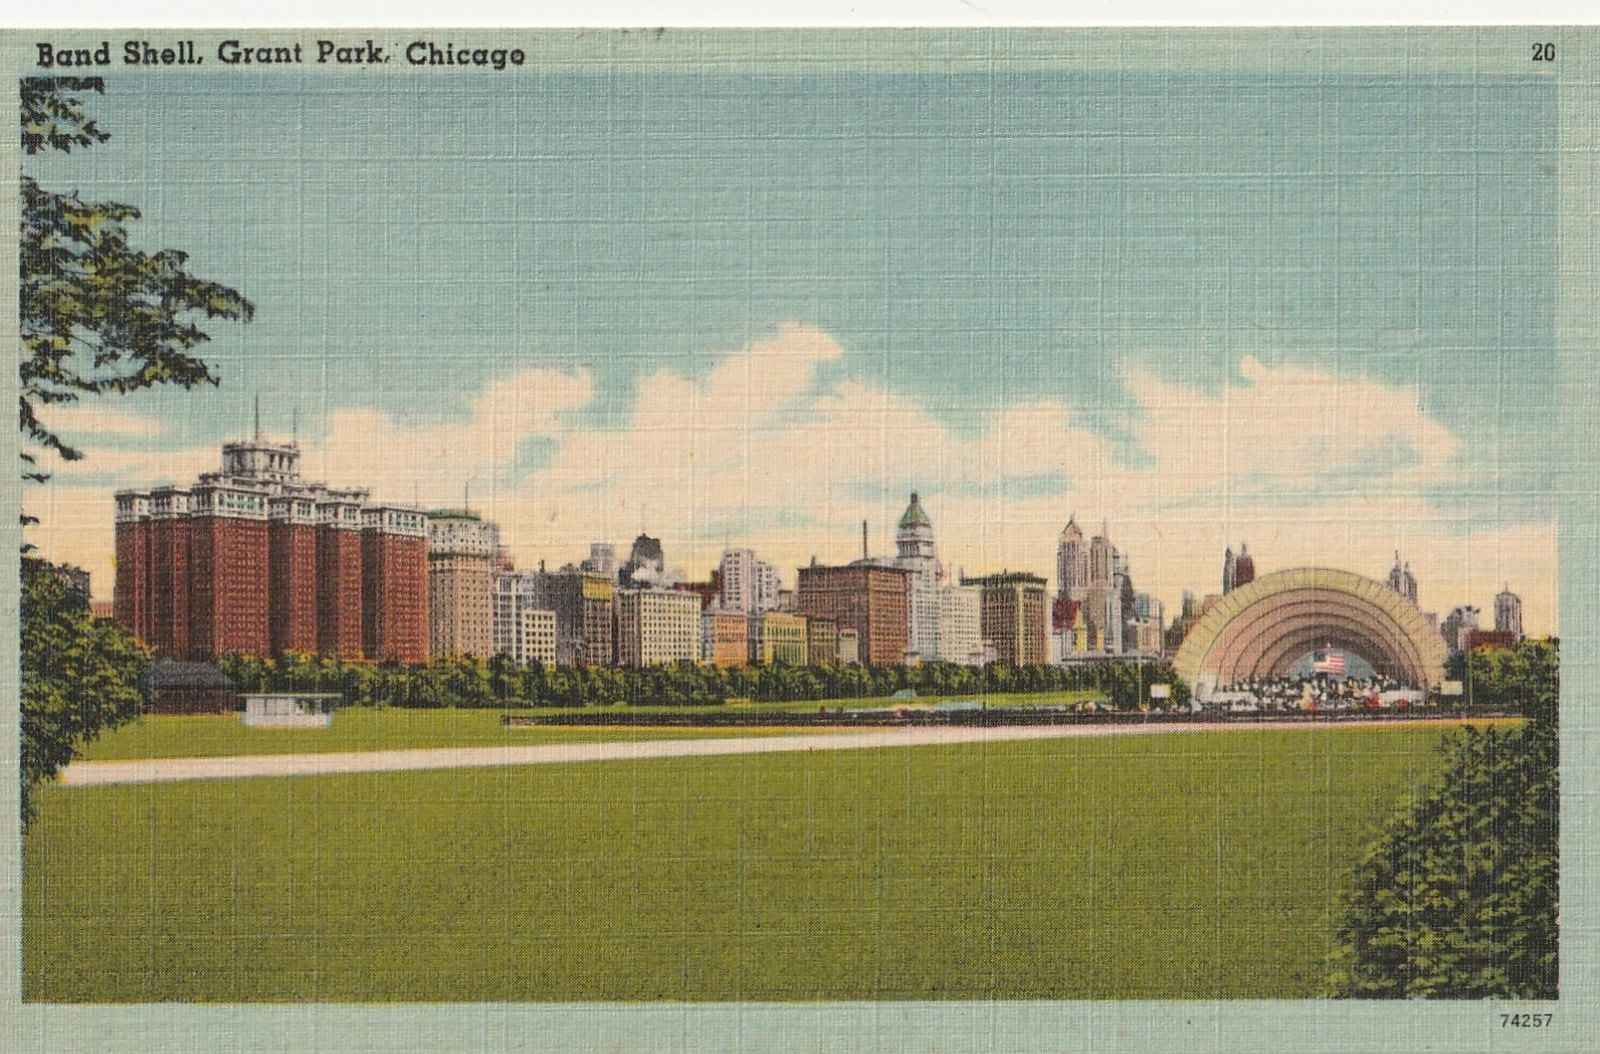 Vintage Postcard Band Shell Grant Park Chicago, Illinois Unposted